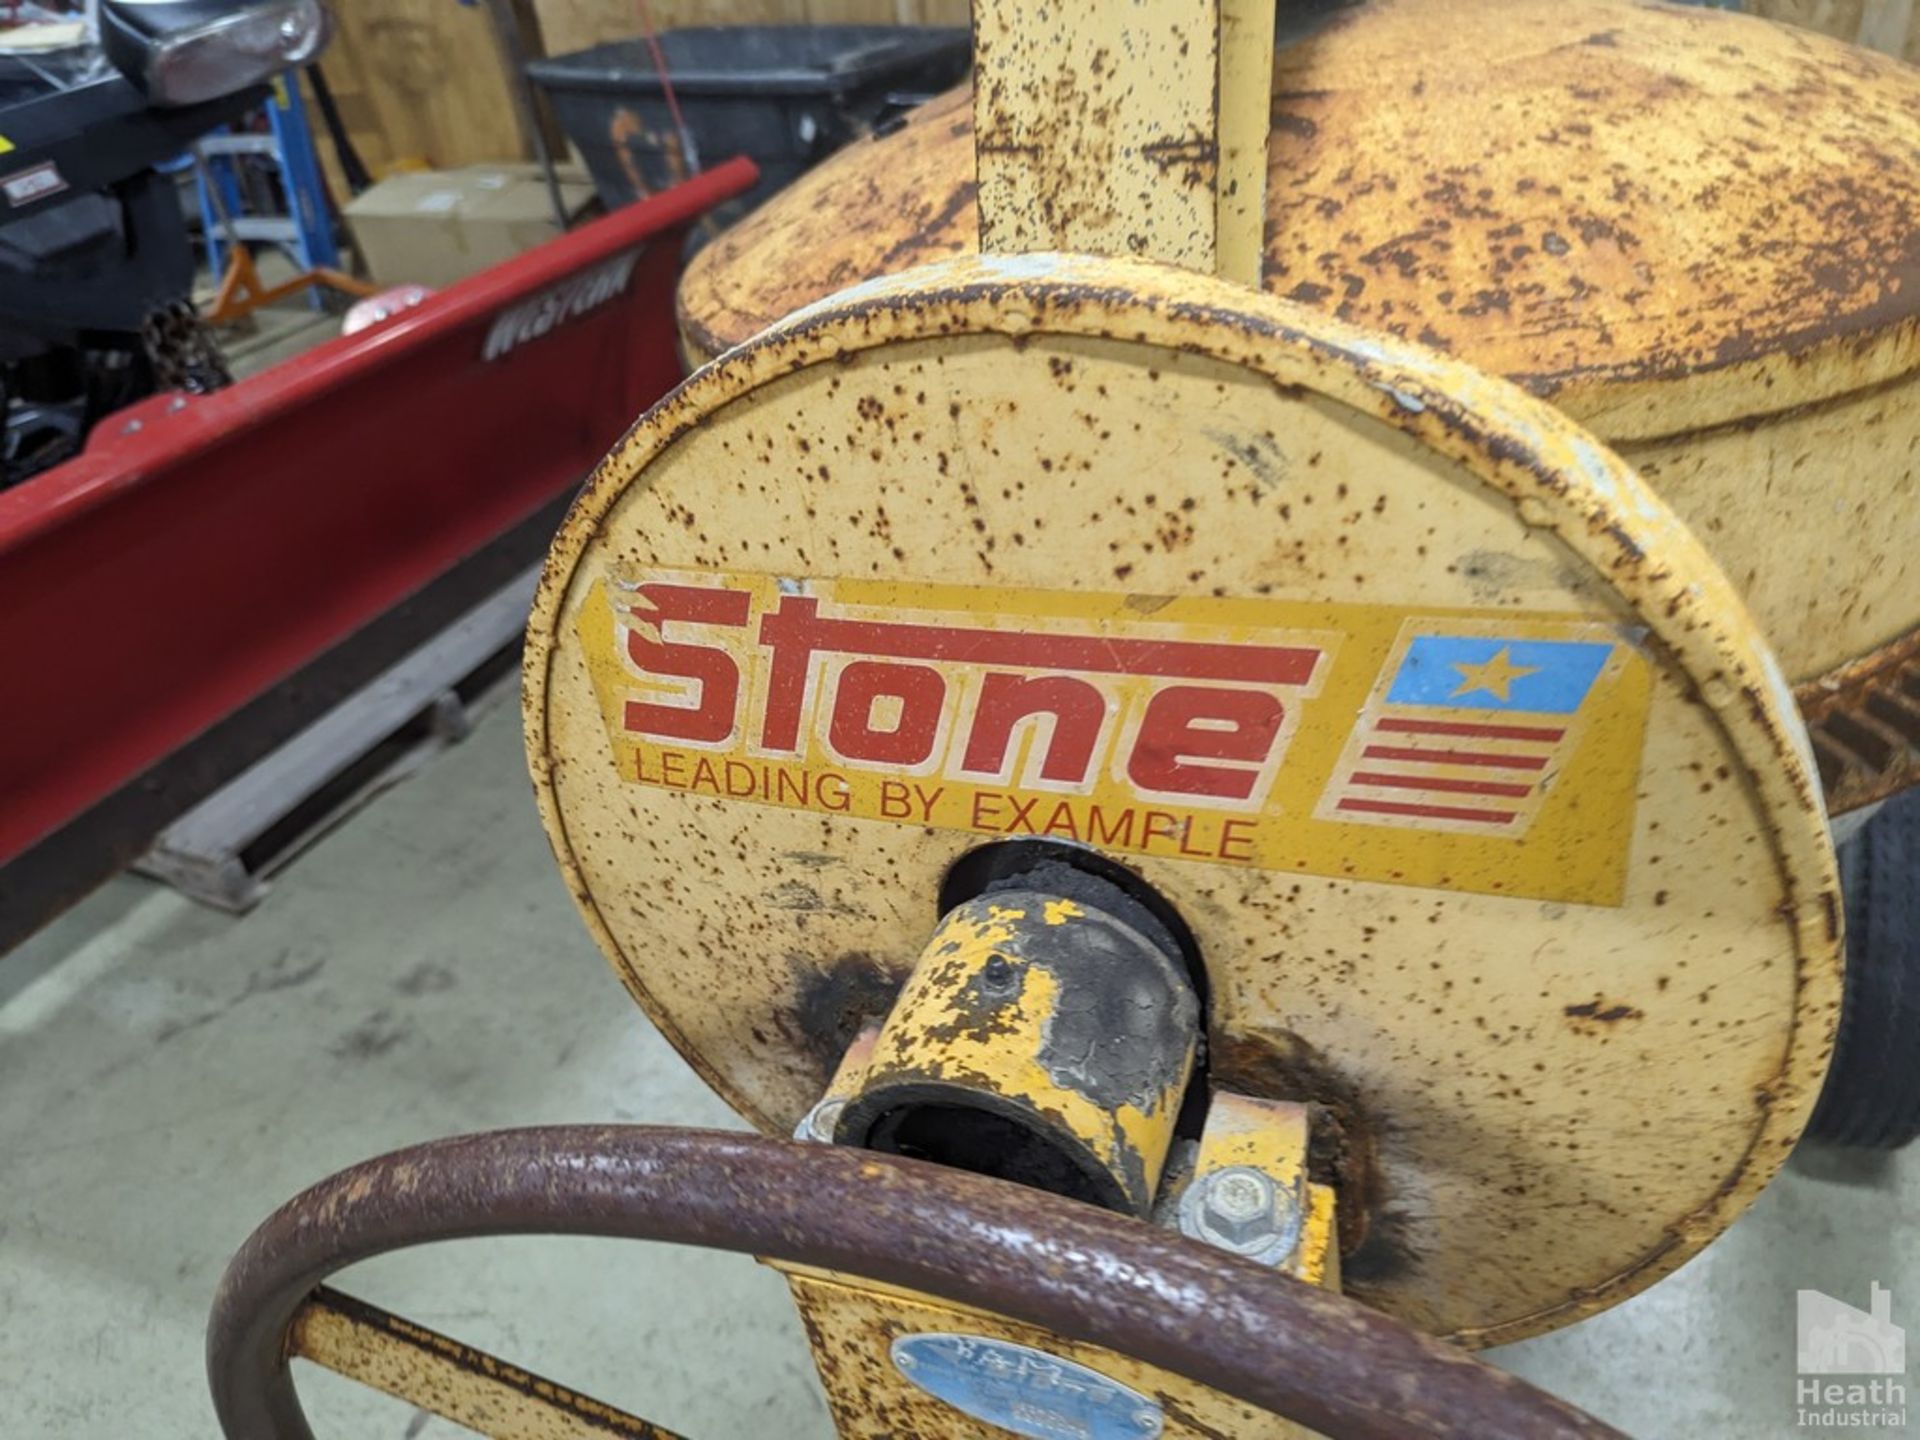 STONE MODEL 65-CM TOW BEHIND GAS POWERED CONCRETE MIXER, HONDA GX270 ENGINE - Image 3 of 10